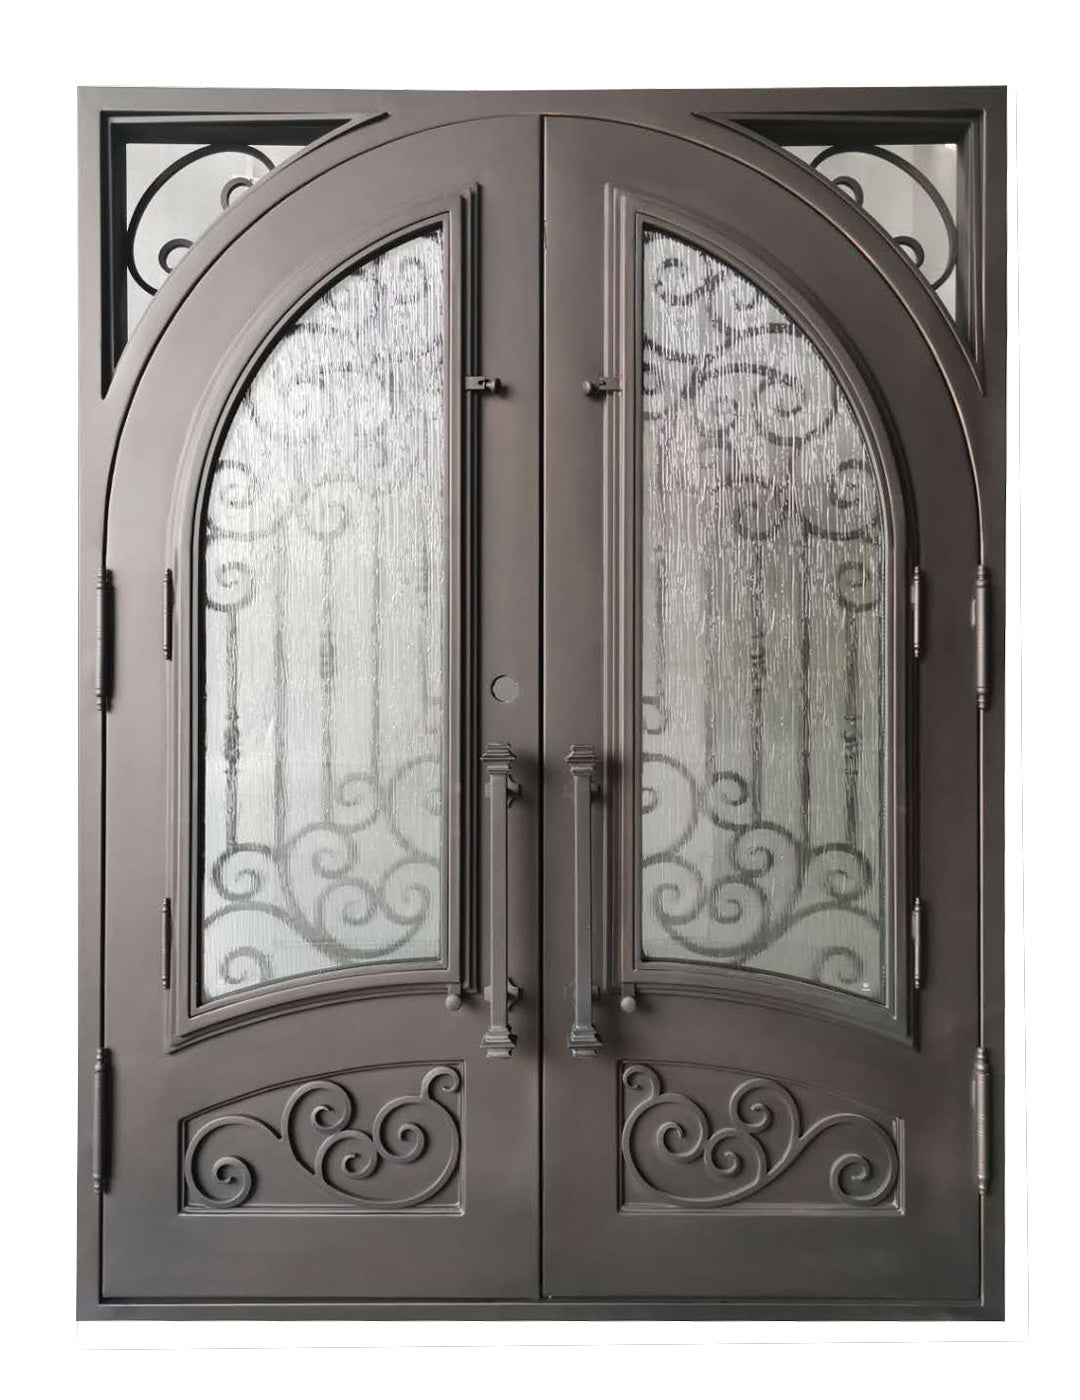 Conroe Model Double Front Entry Iron Door With Tempered Rain Glass Dark Bronze Finish - AAWAIZ IMPORTS